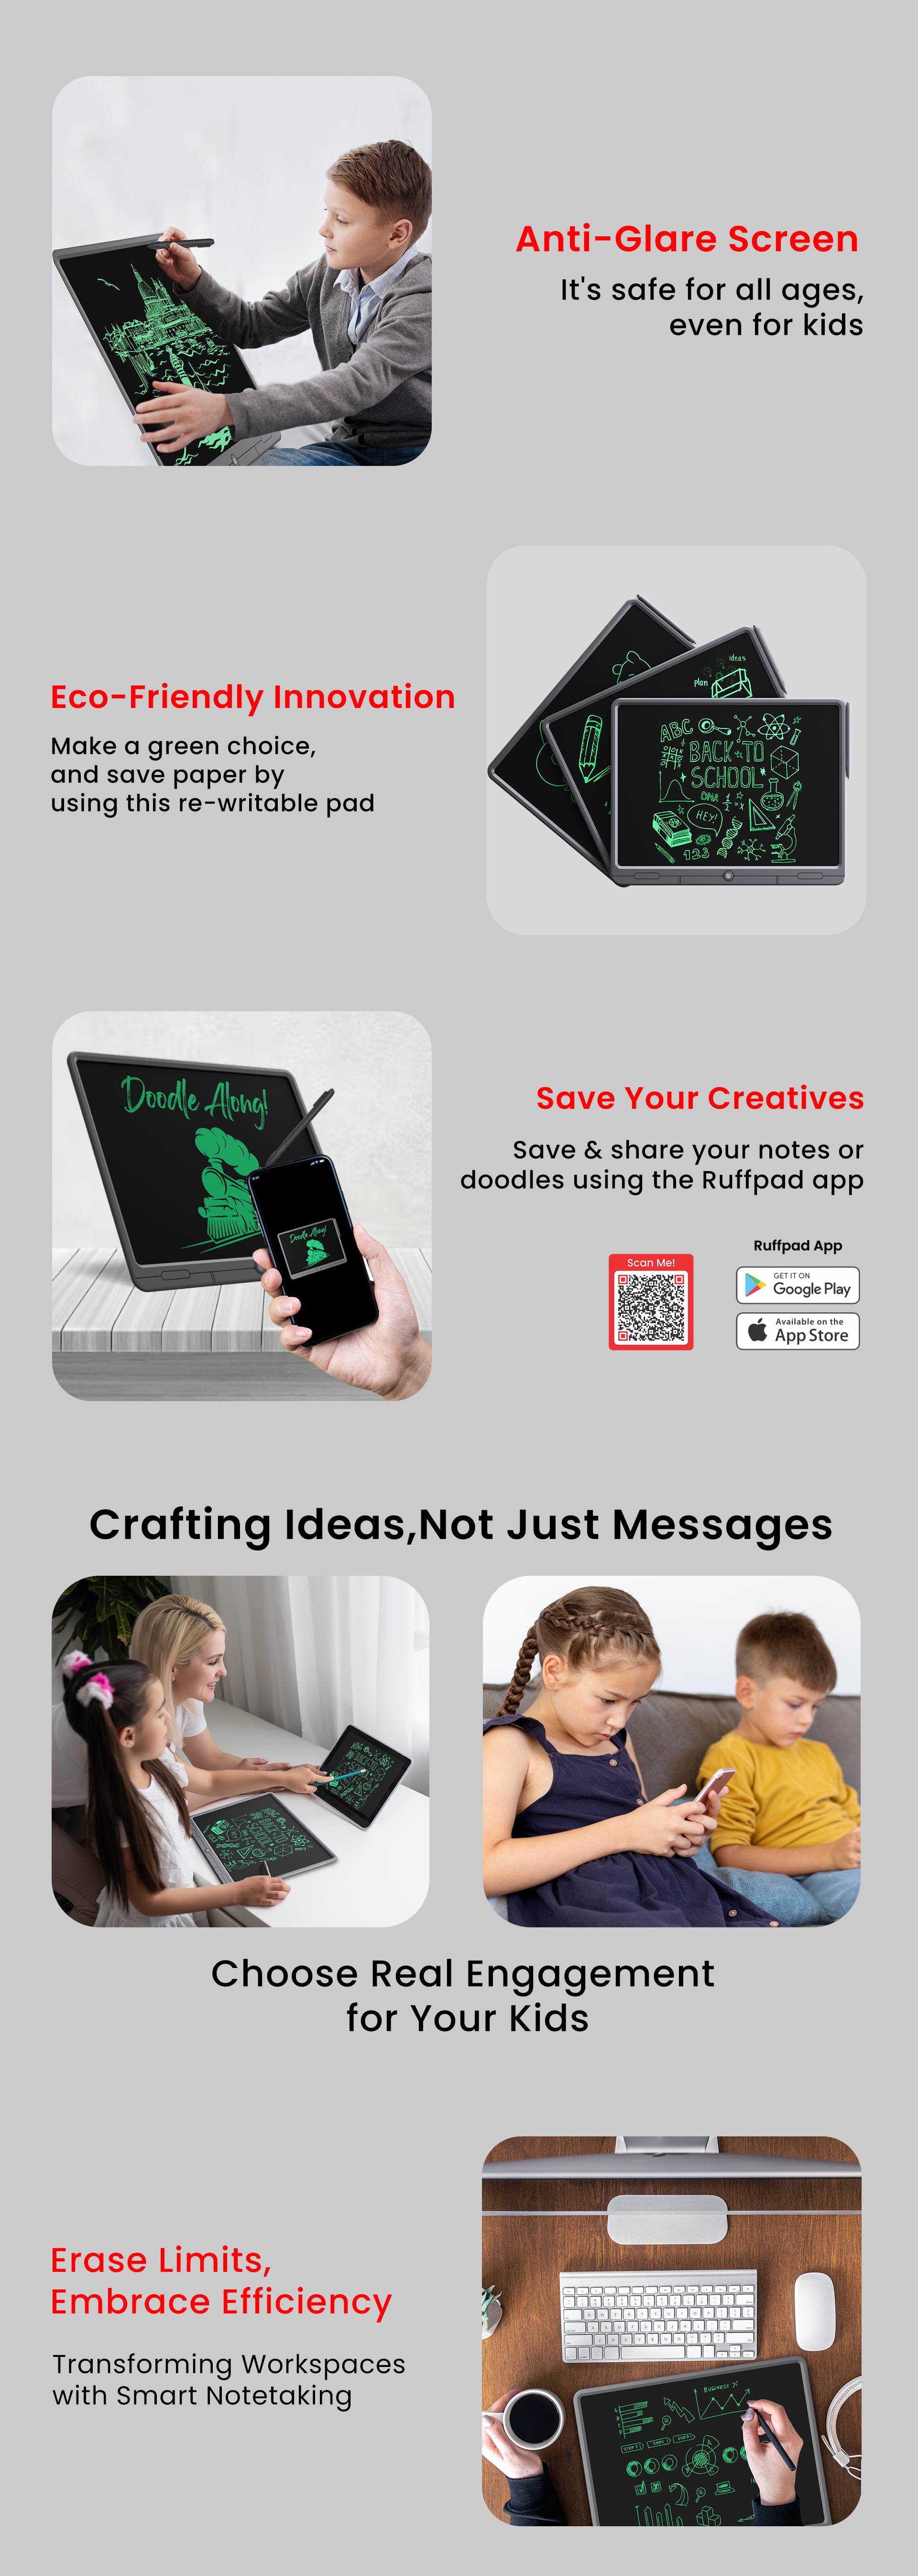 Portronics Ruffpad 21 LCD Writing Pad and lcd writing tablet for kids